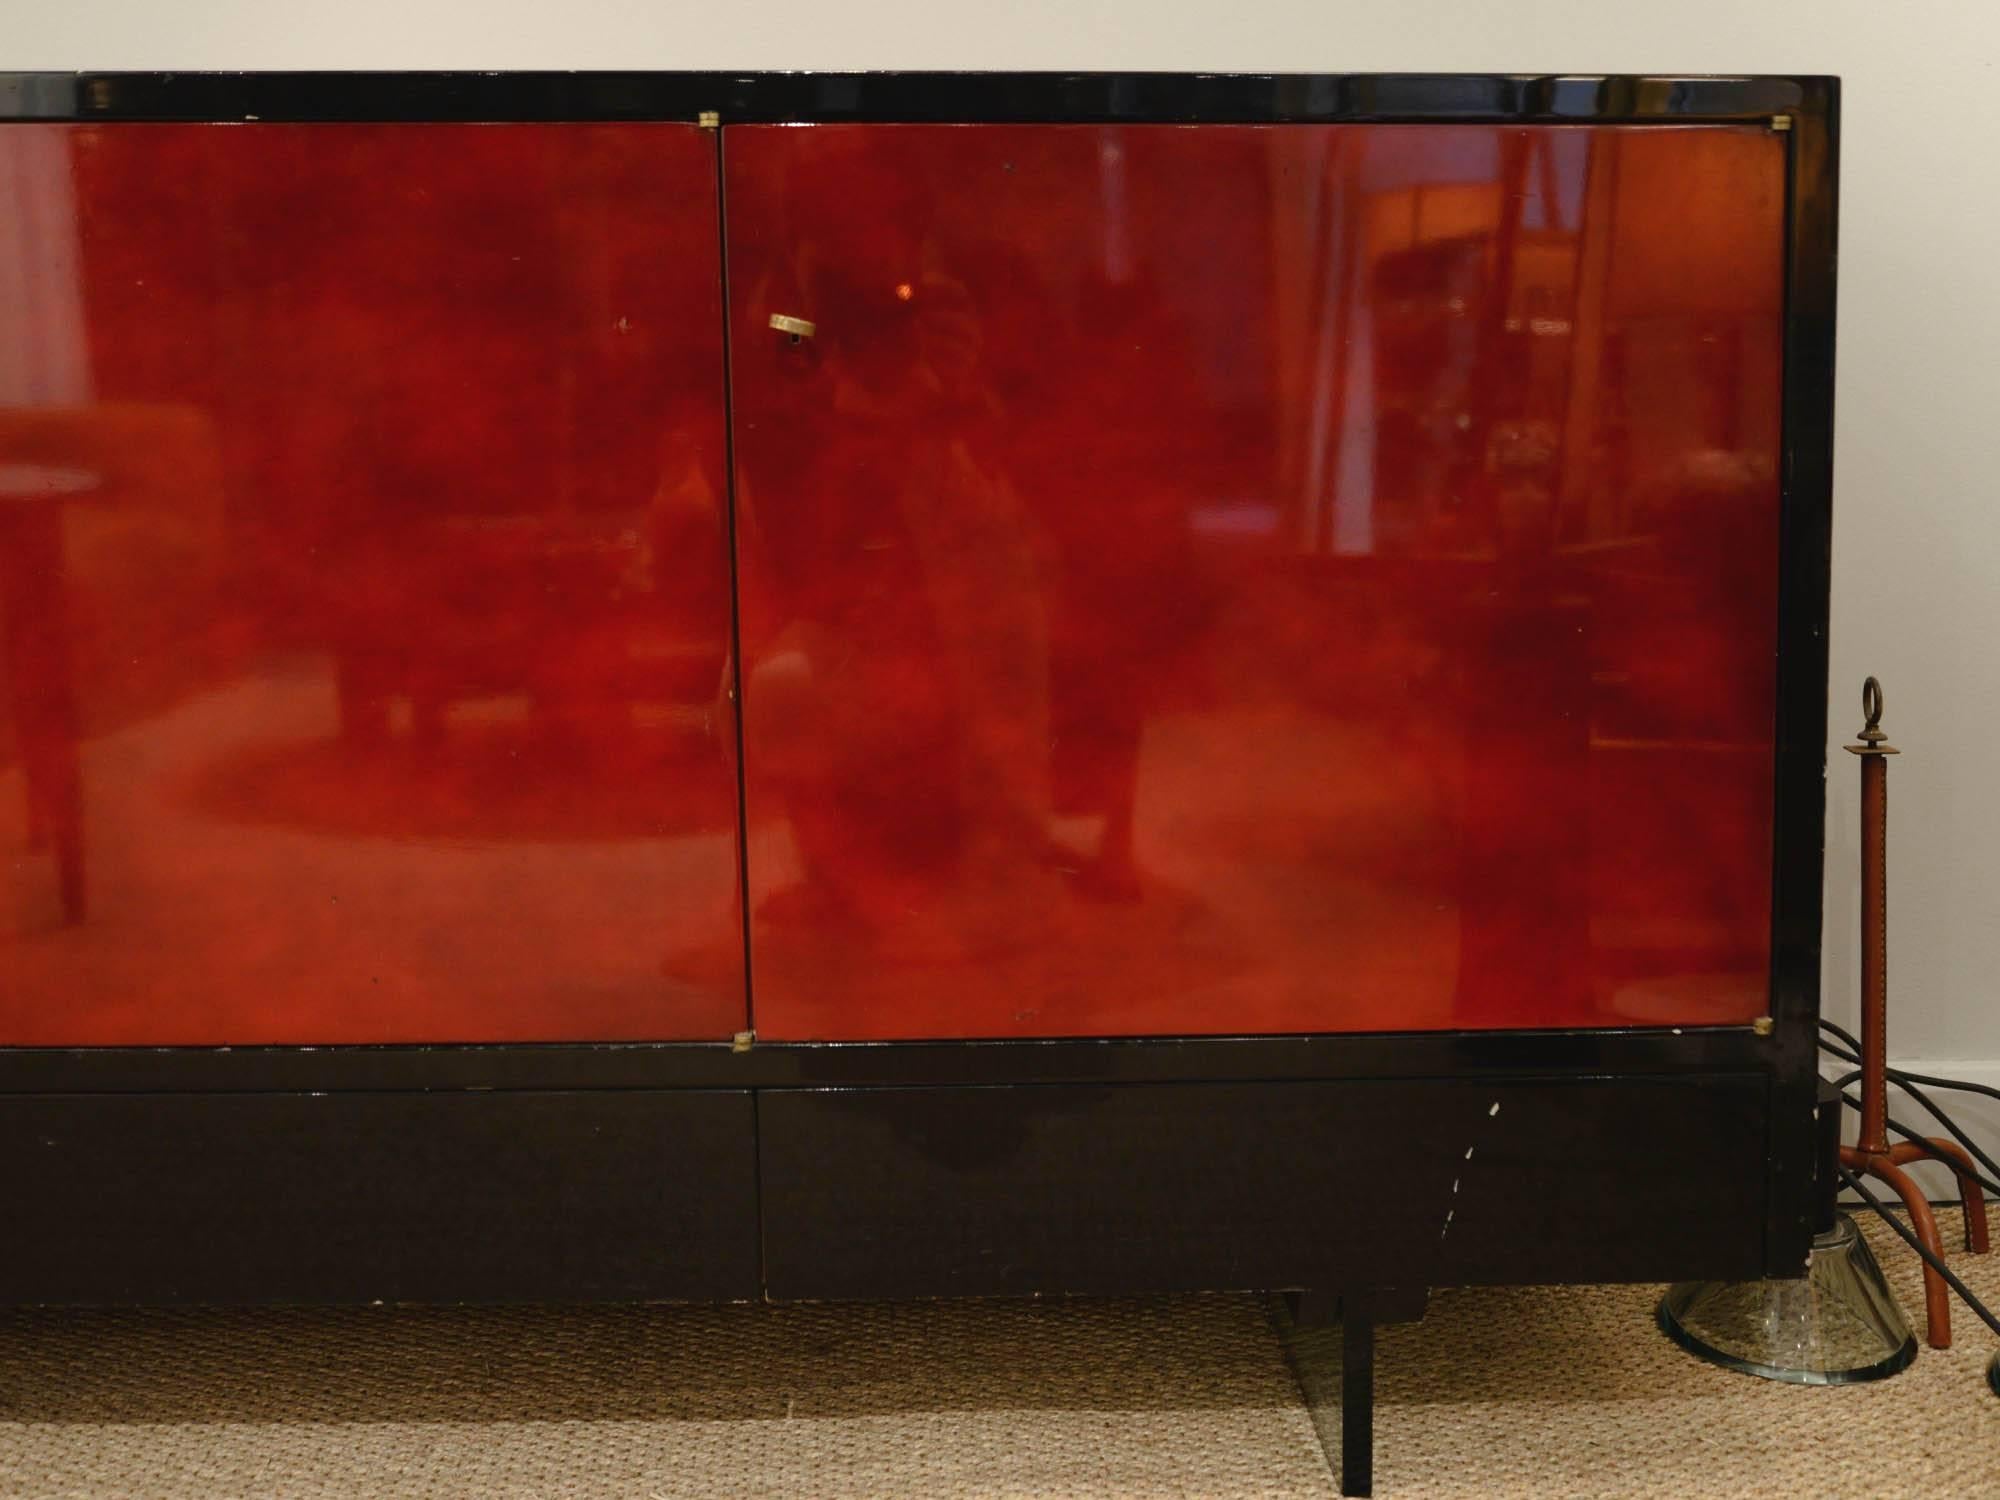 Raphaël
Sideboard
Beka lacquer wood glass
France, 1950.
Measures: H 84 x W 220 x D 46 cm
H 33 1/8 x W 86 5/8 x D 18 1/8 inch.
Referenced in 